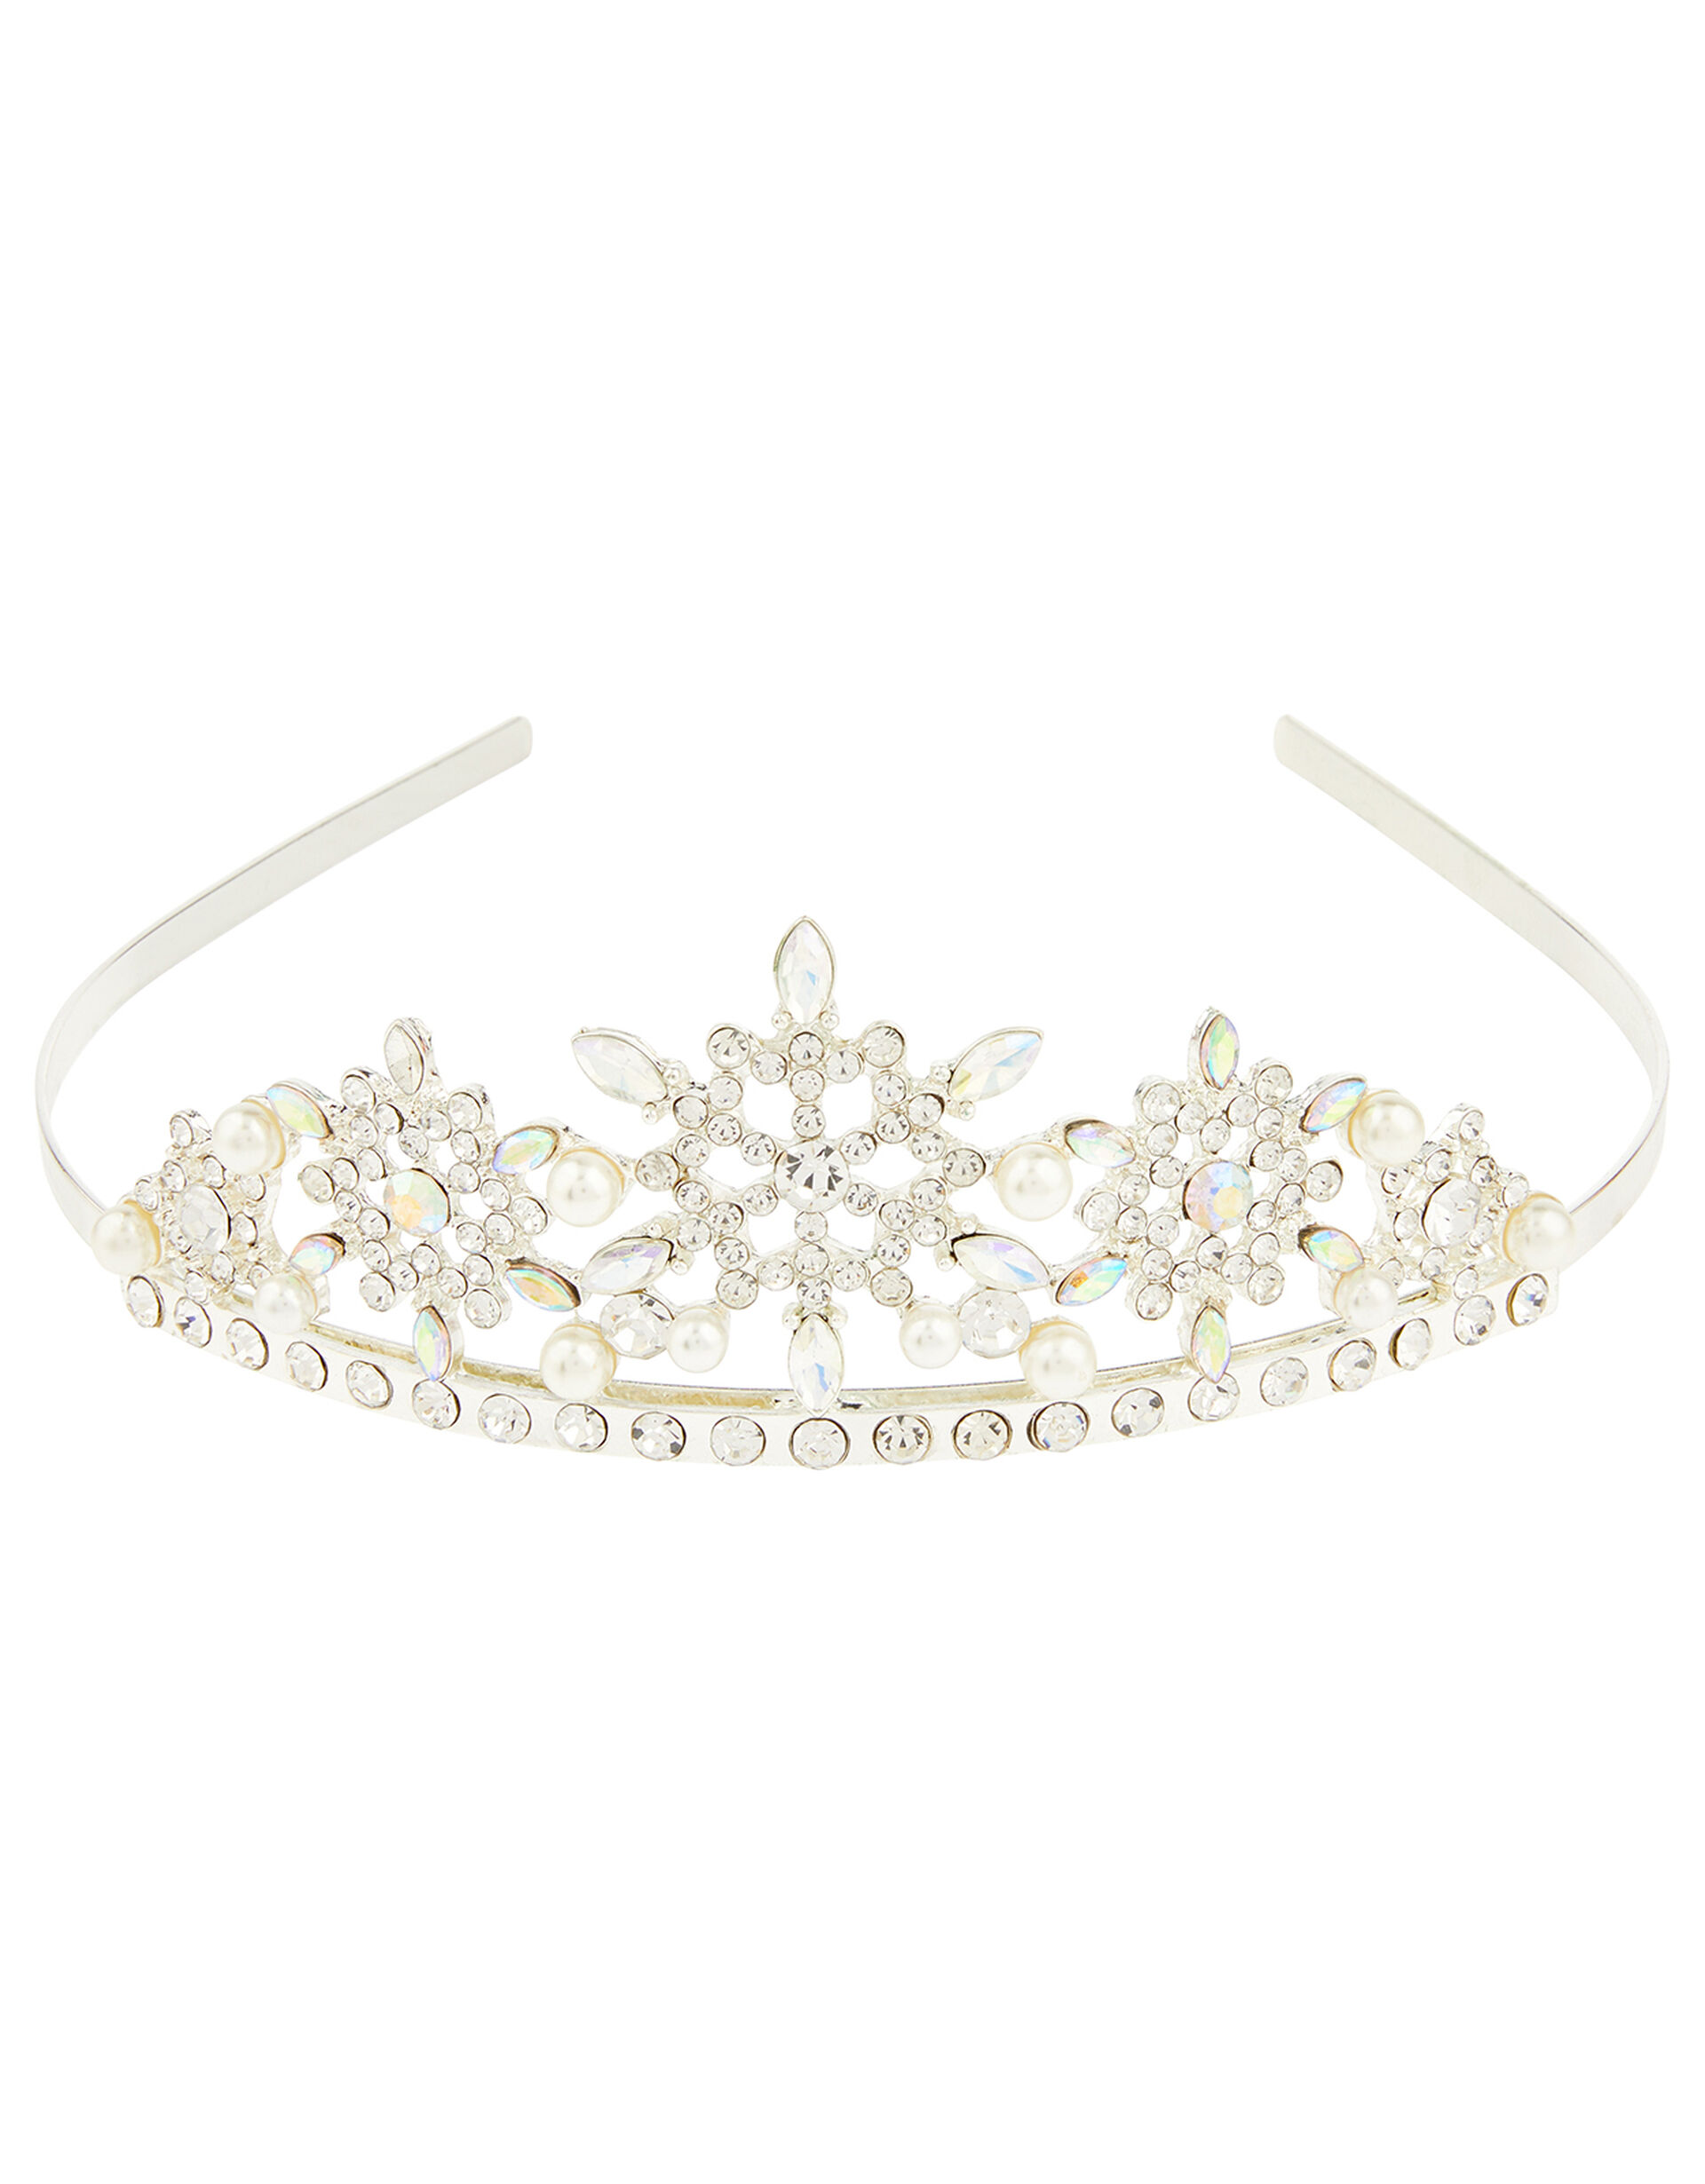 Cosmic Frost Sparkle Tiara, , large